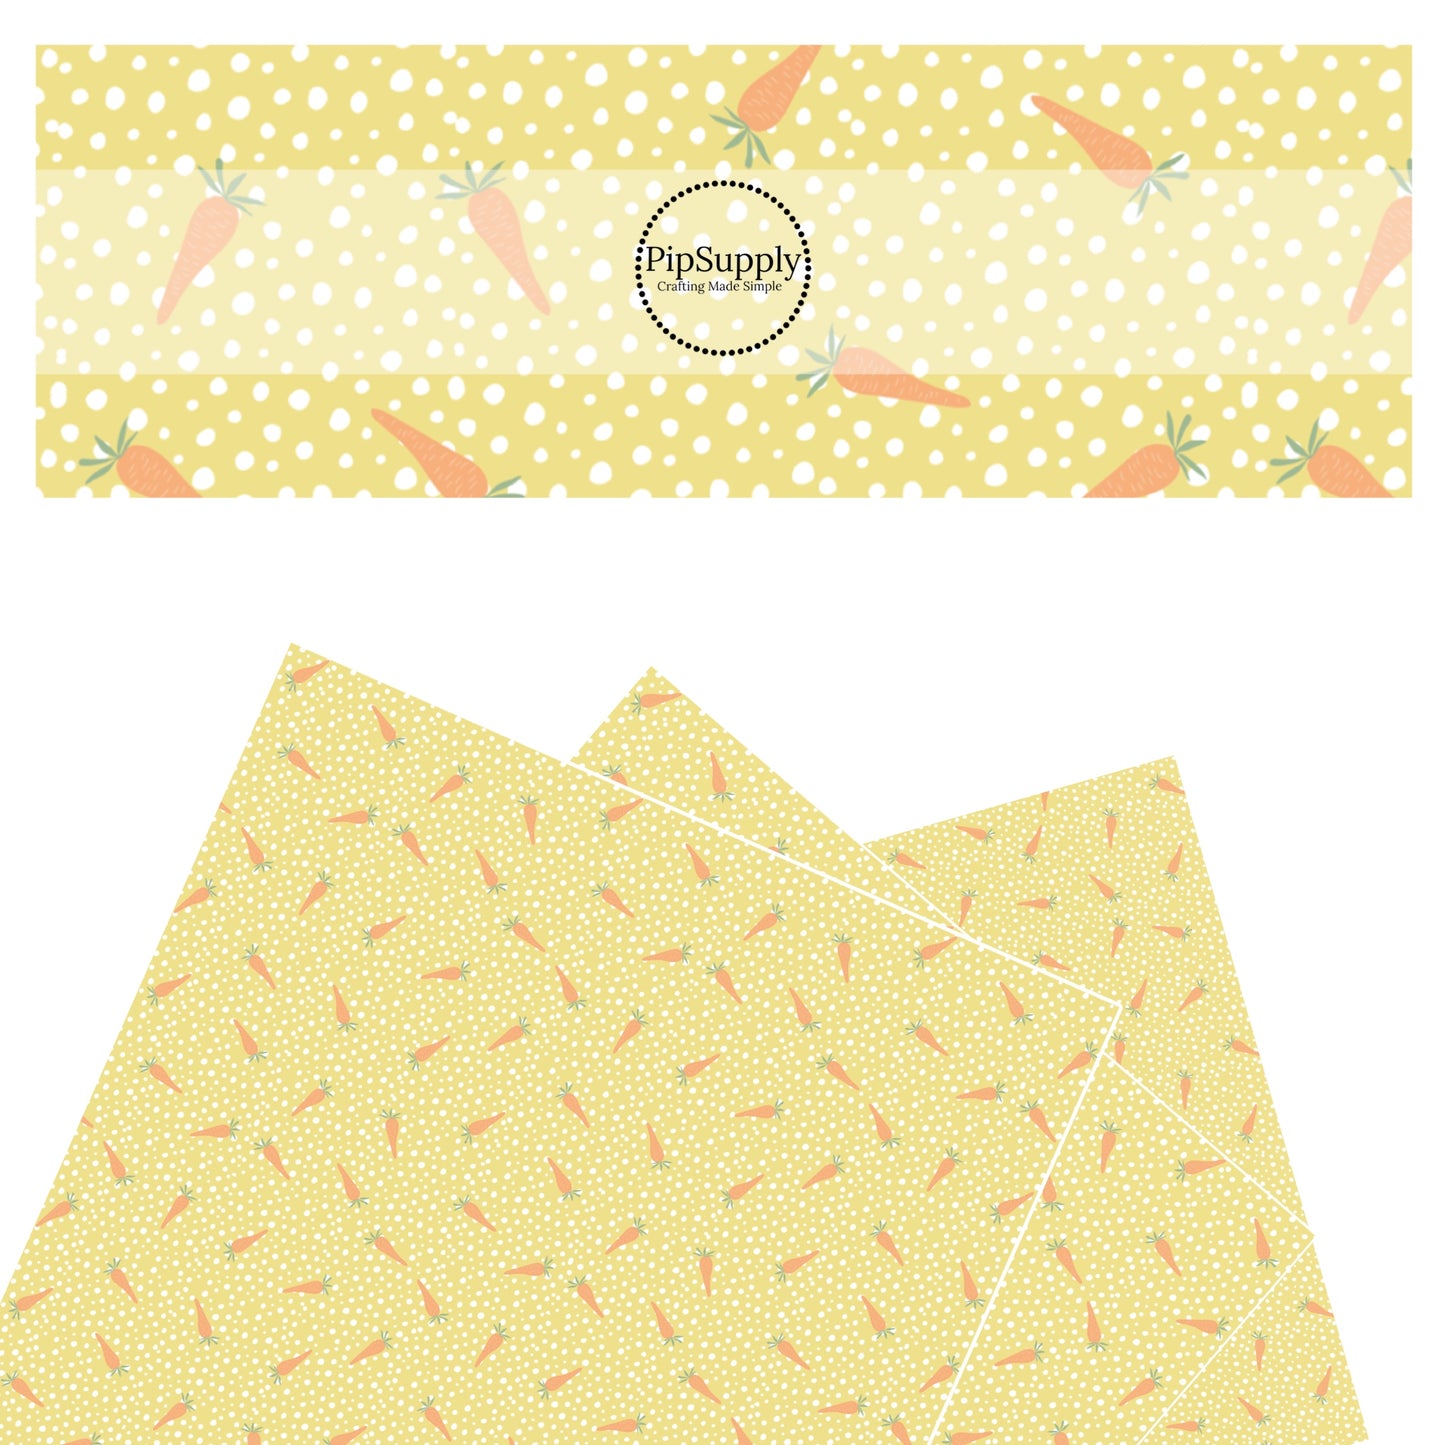 These spring pattern themed faux leather sheets contain the following design elements: tiny carrots surrounded by white dots on yellow. Our CPSIA compliant faux leather sheets or rolls can be used for all types of crafting projects.